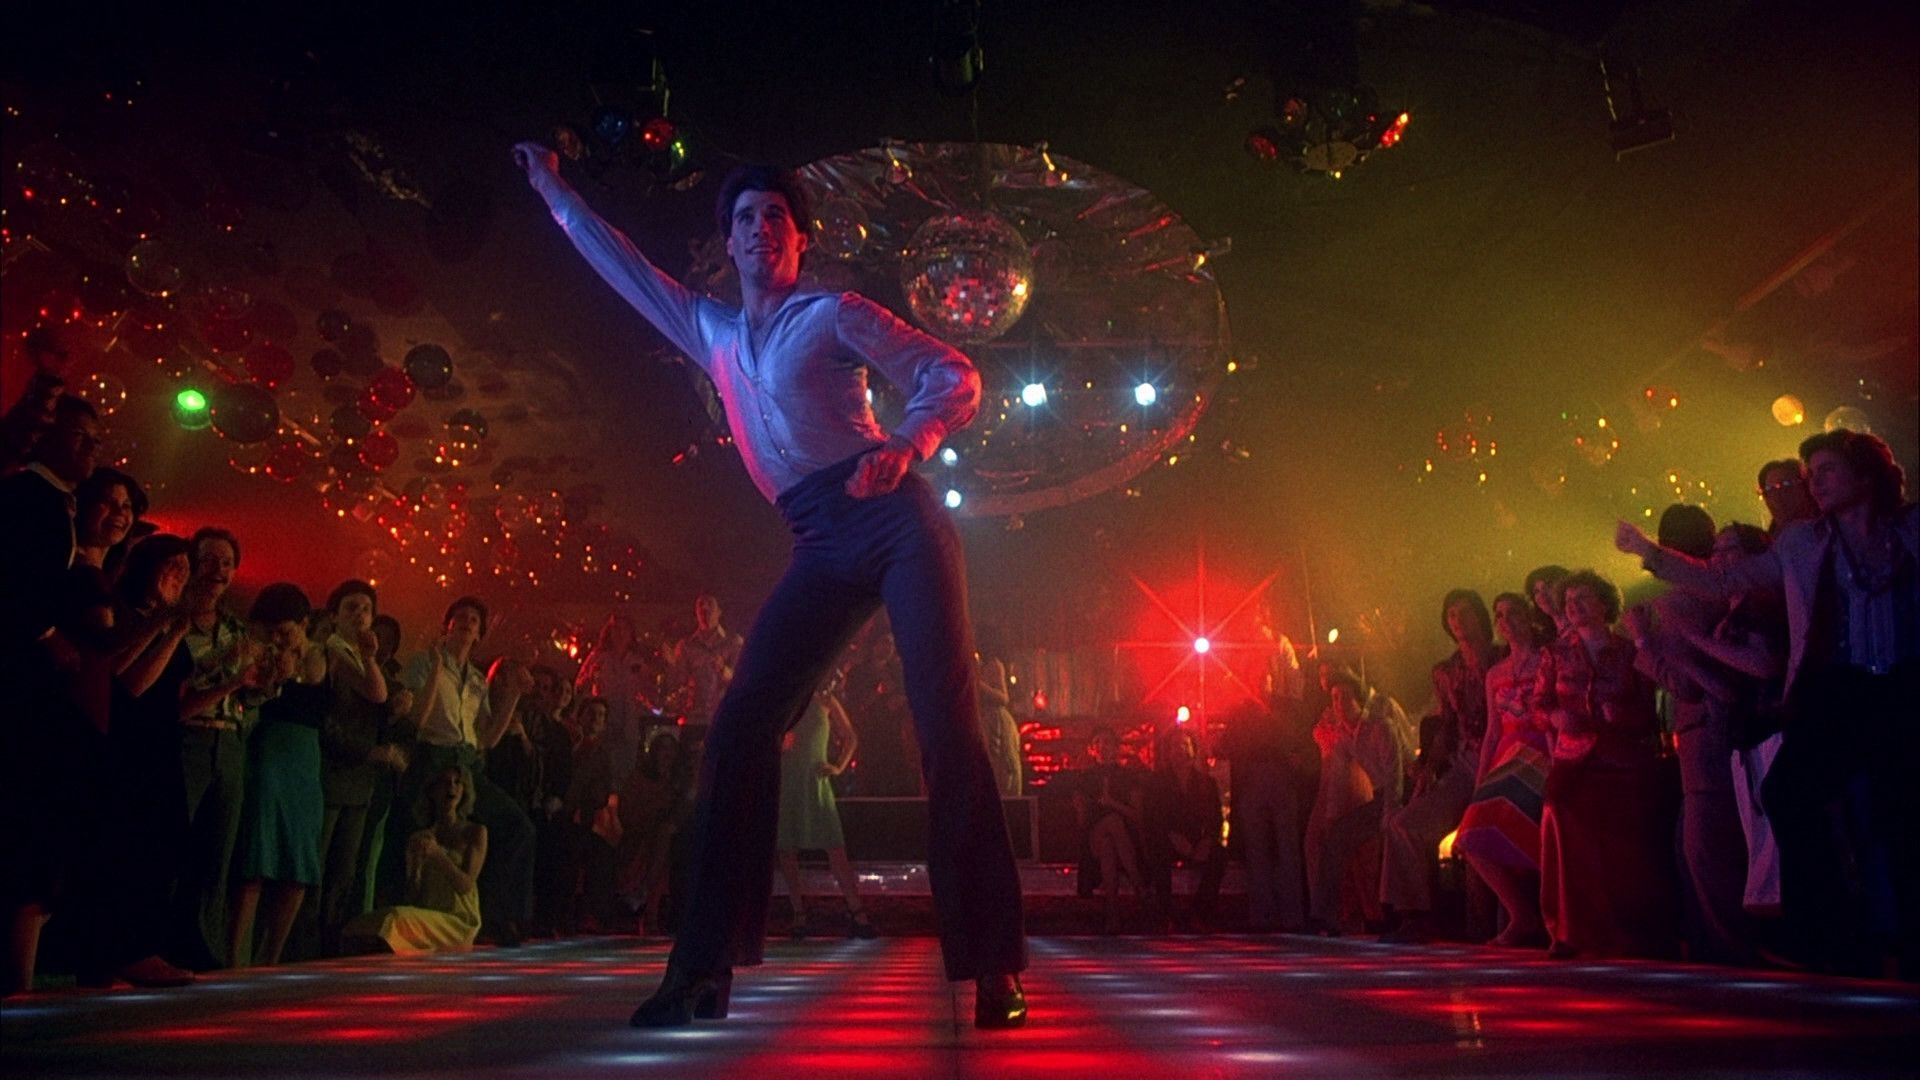 1920x1080 Saturday Night Fever Wallpapers Top Free Saturday Night Fever Backgrounds